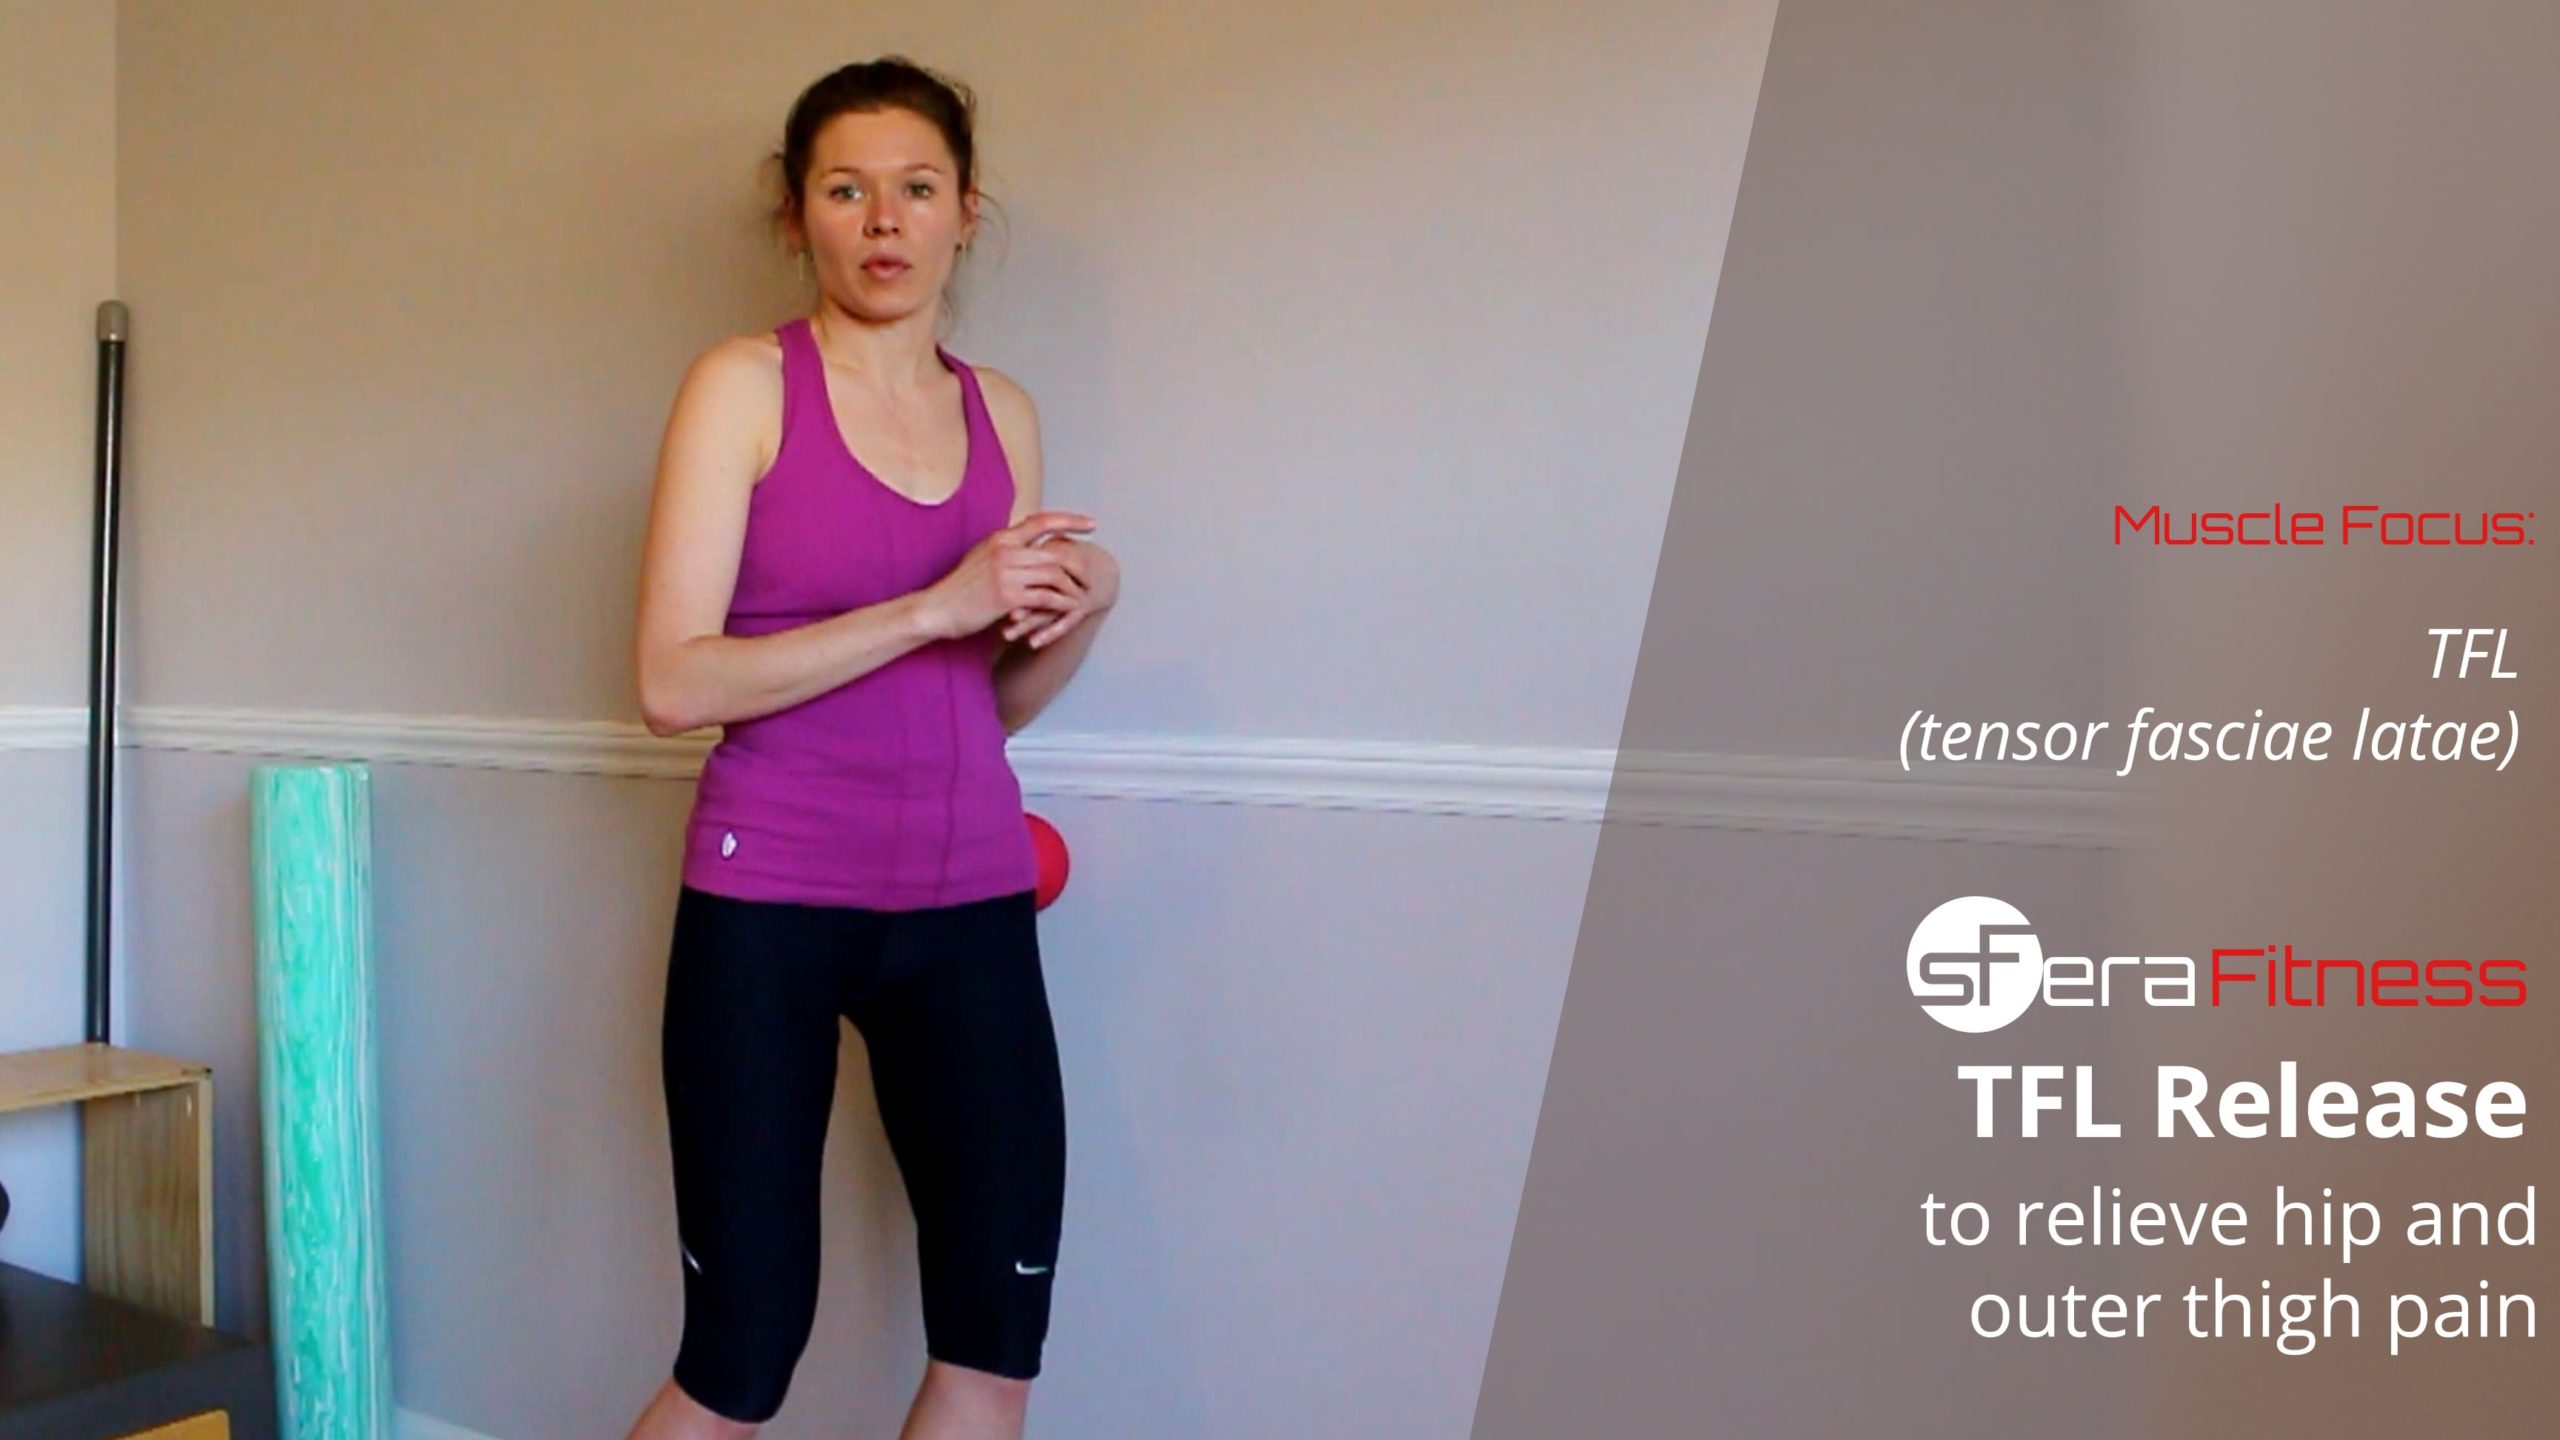 Relieve Hip and Outer Thigh Pain by Releasing the TFL Muscle